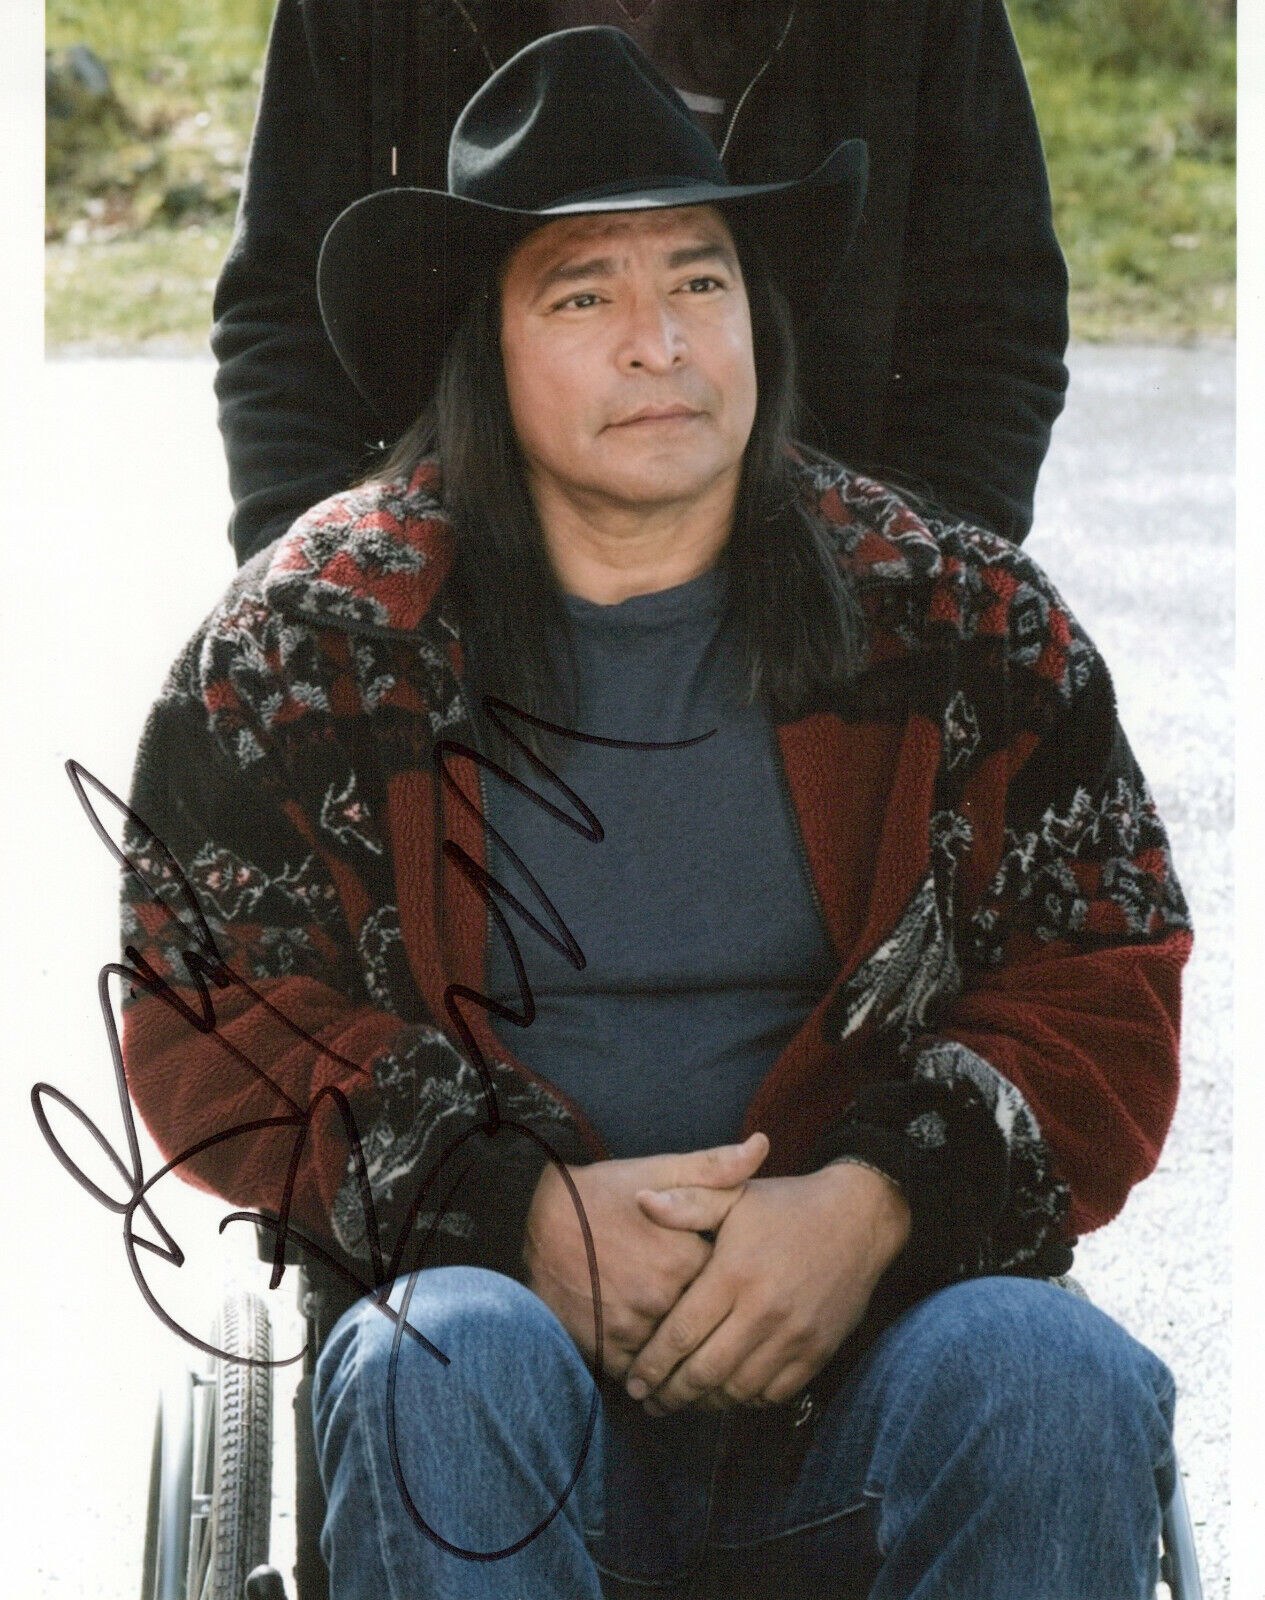 Gil Birmingham Twilight autographed Photo Poster painting signed 8x10 #2 Billy Black